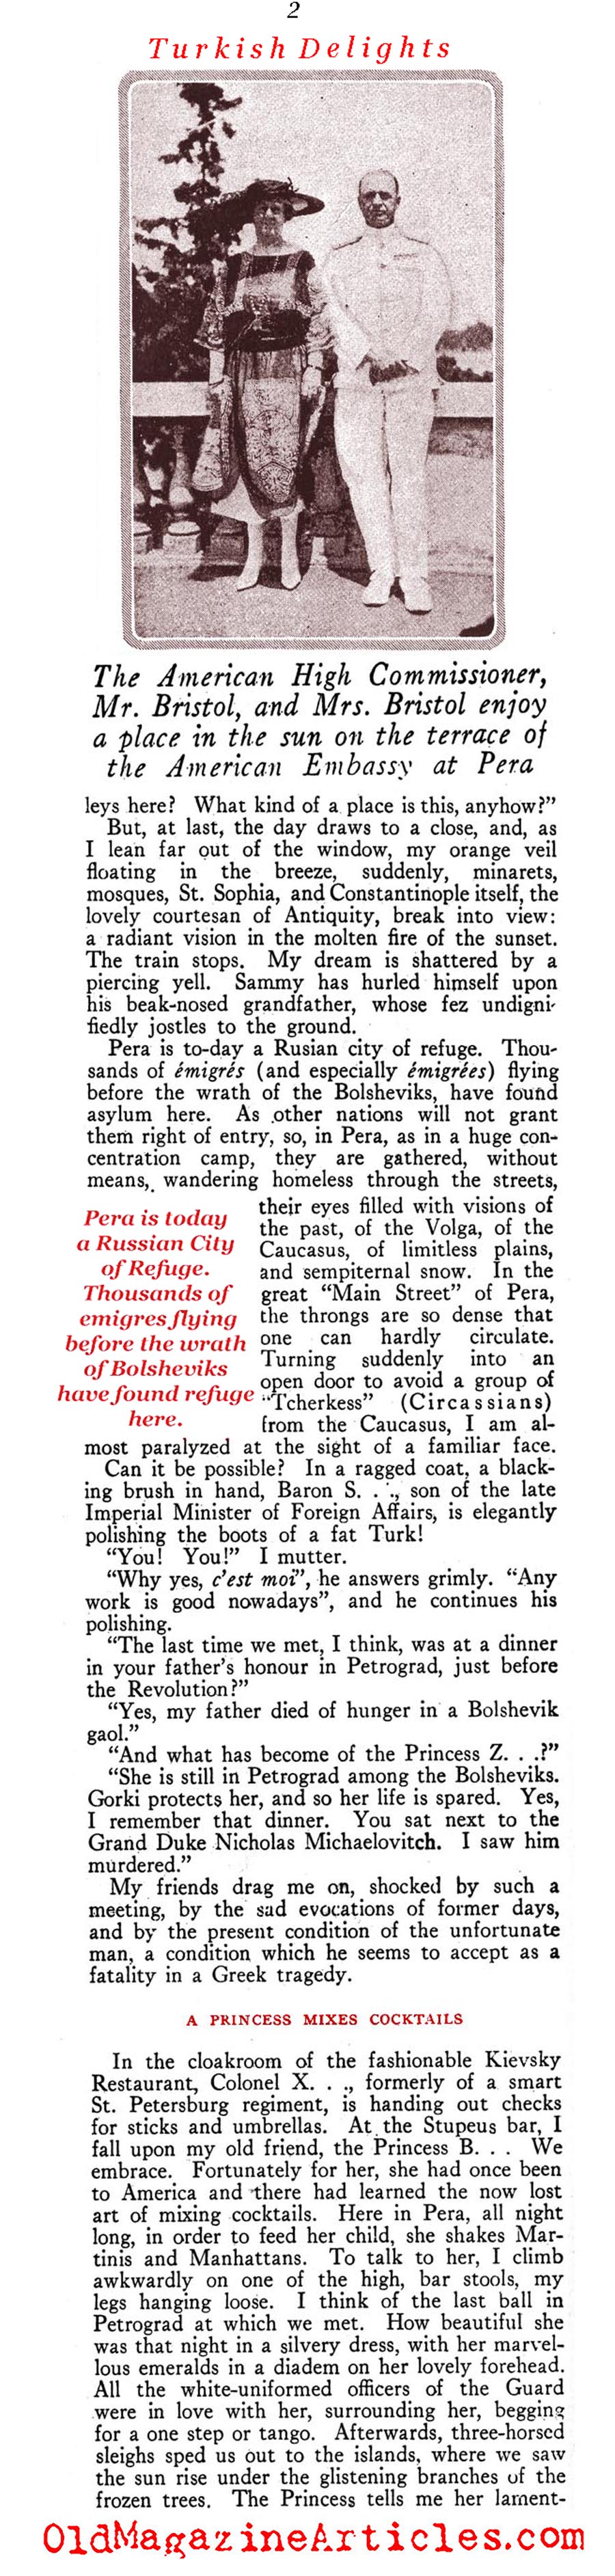 The  Russian Nobility Struggled in Exile (Vogue Magazine, 1922)